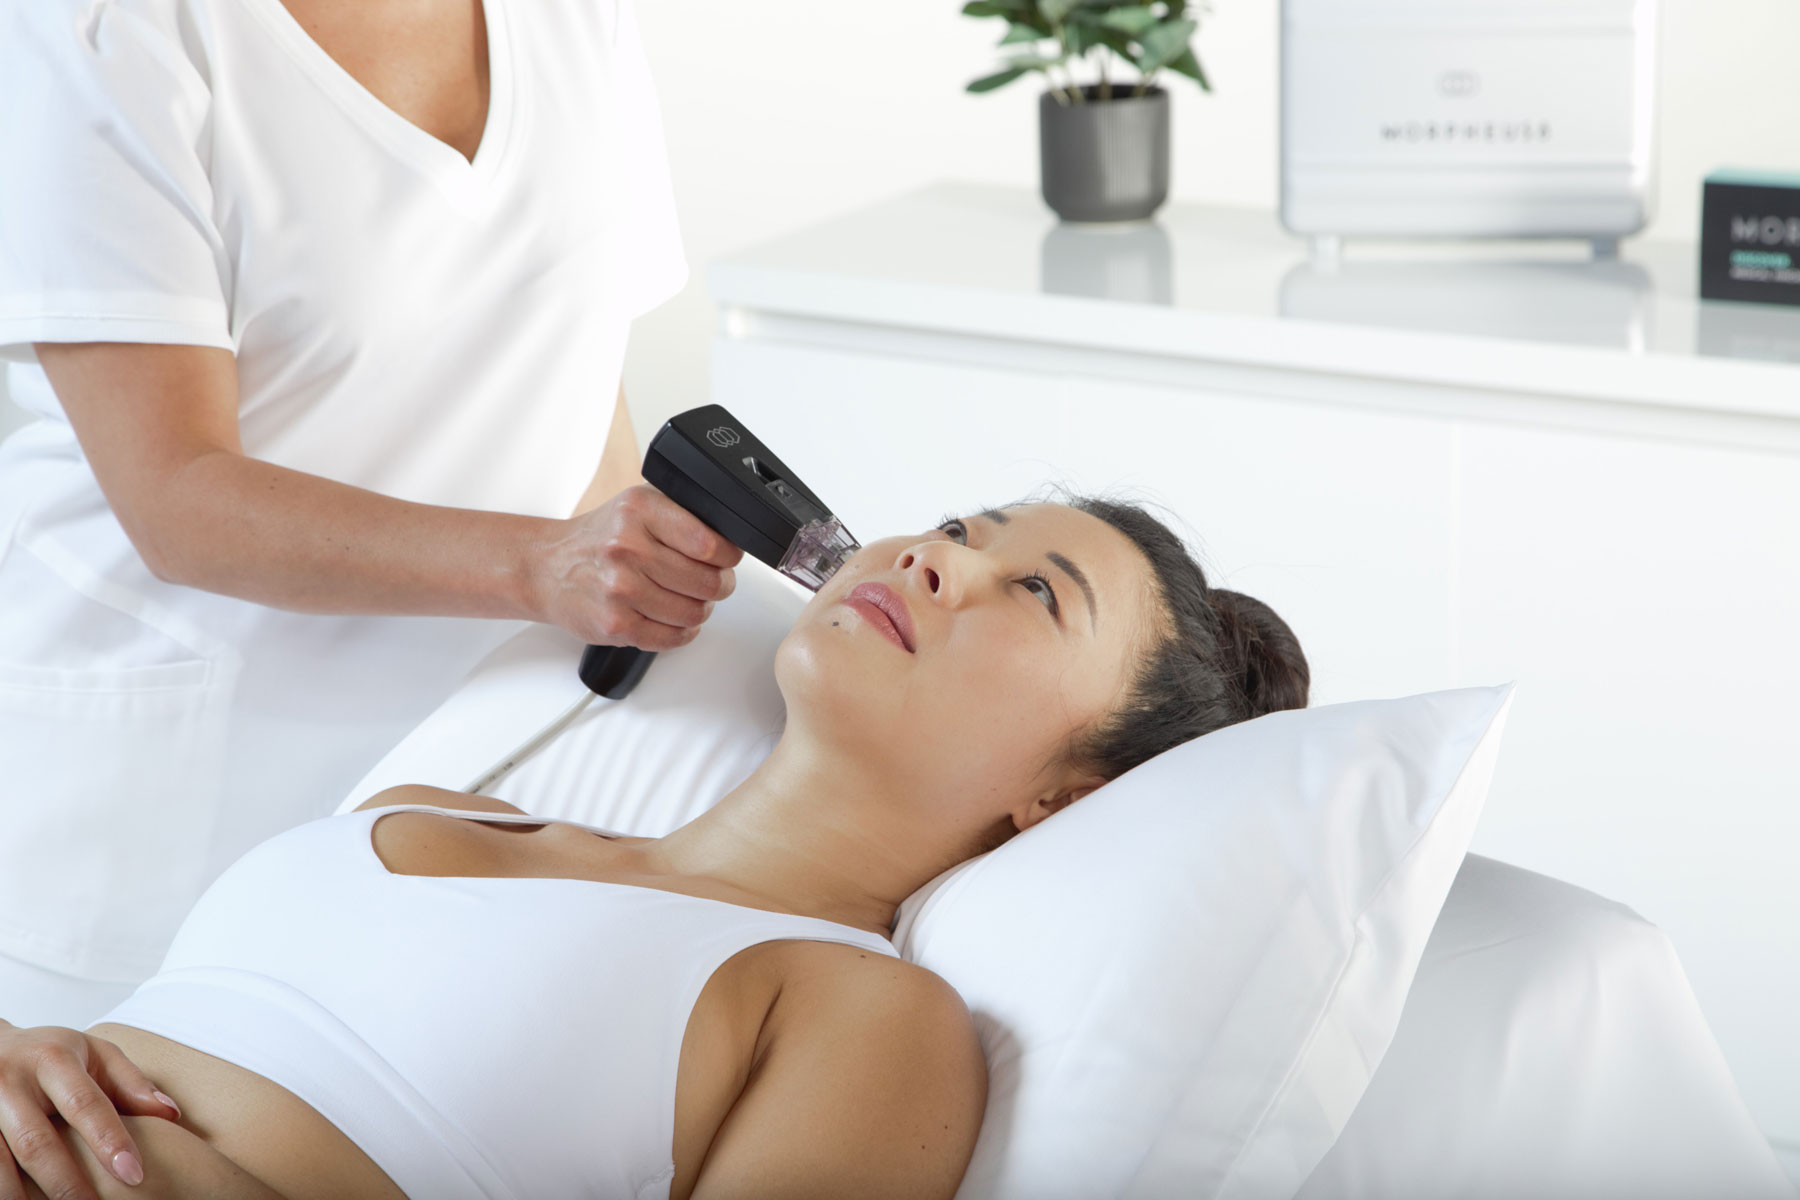 Does microneedling with radiofrequency (RF Microneedling) face treatment cause fat loss?